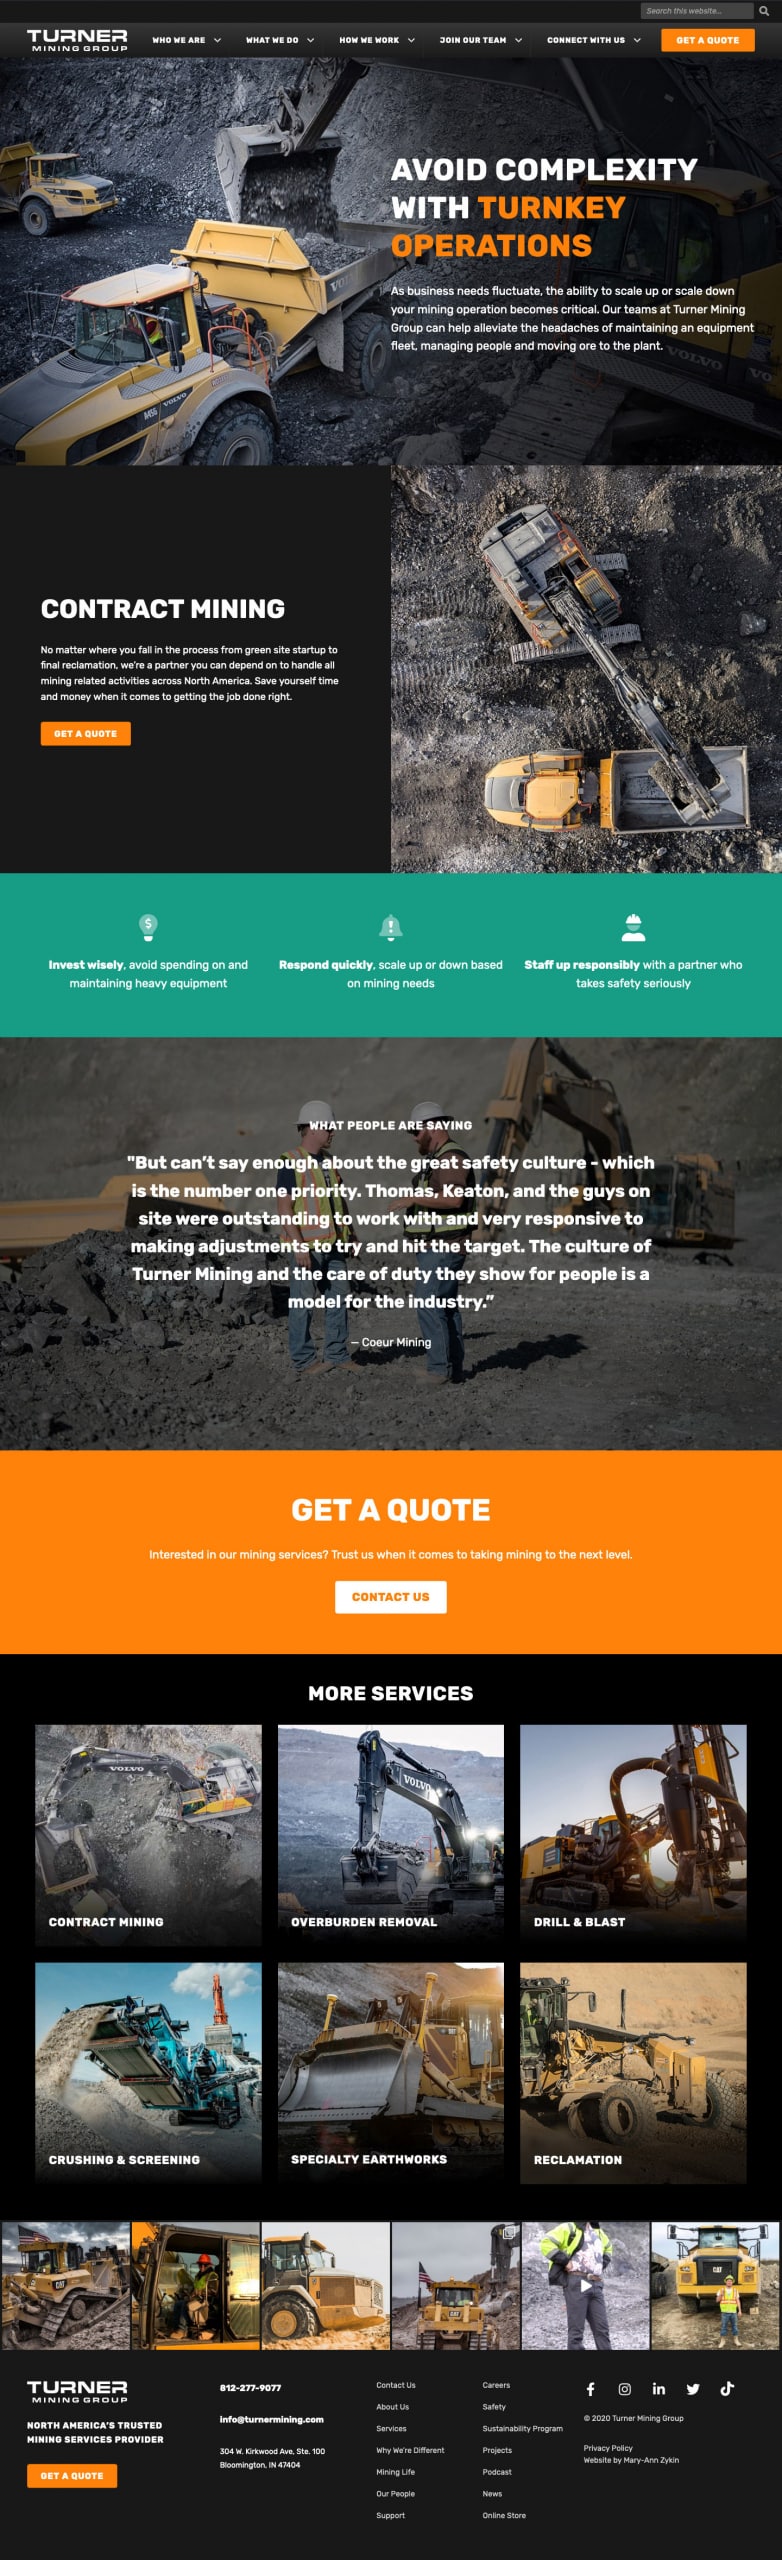 Turner Mining Group Service Page